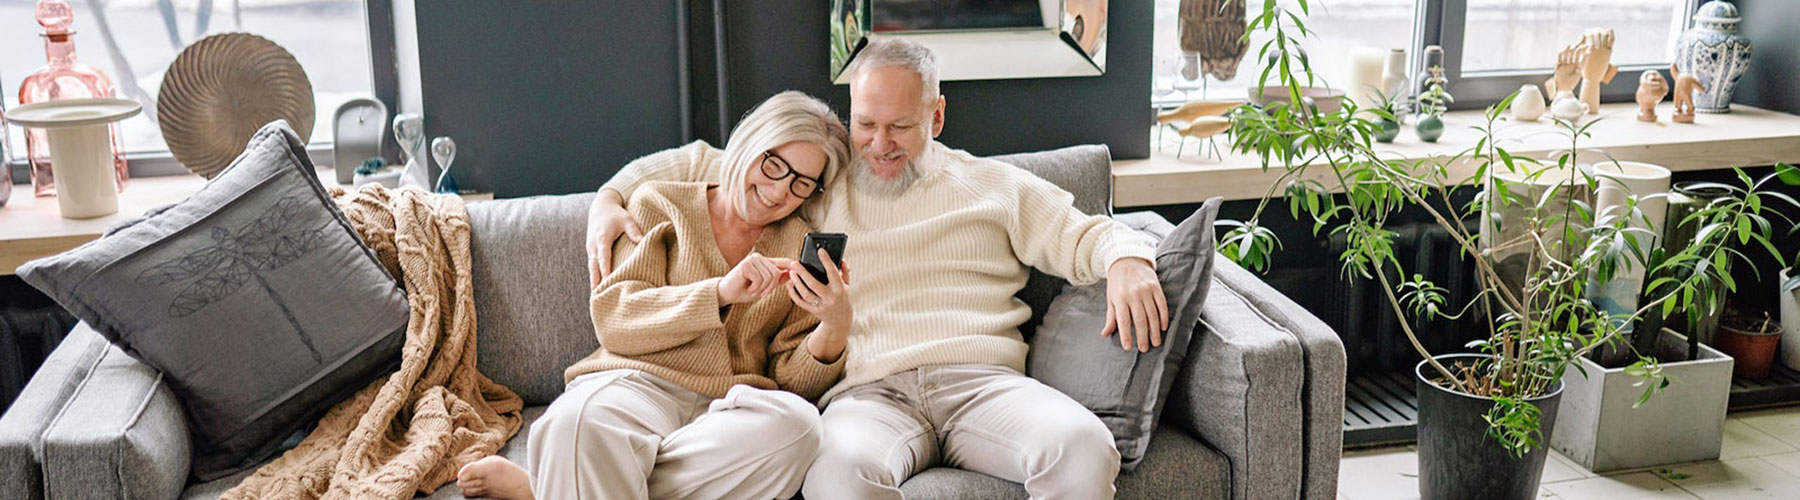 Happy senior couple sitting next to each on couch looking at smartphone